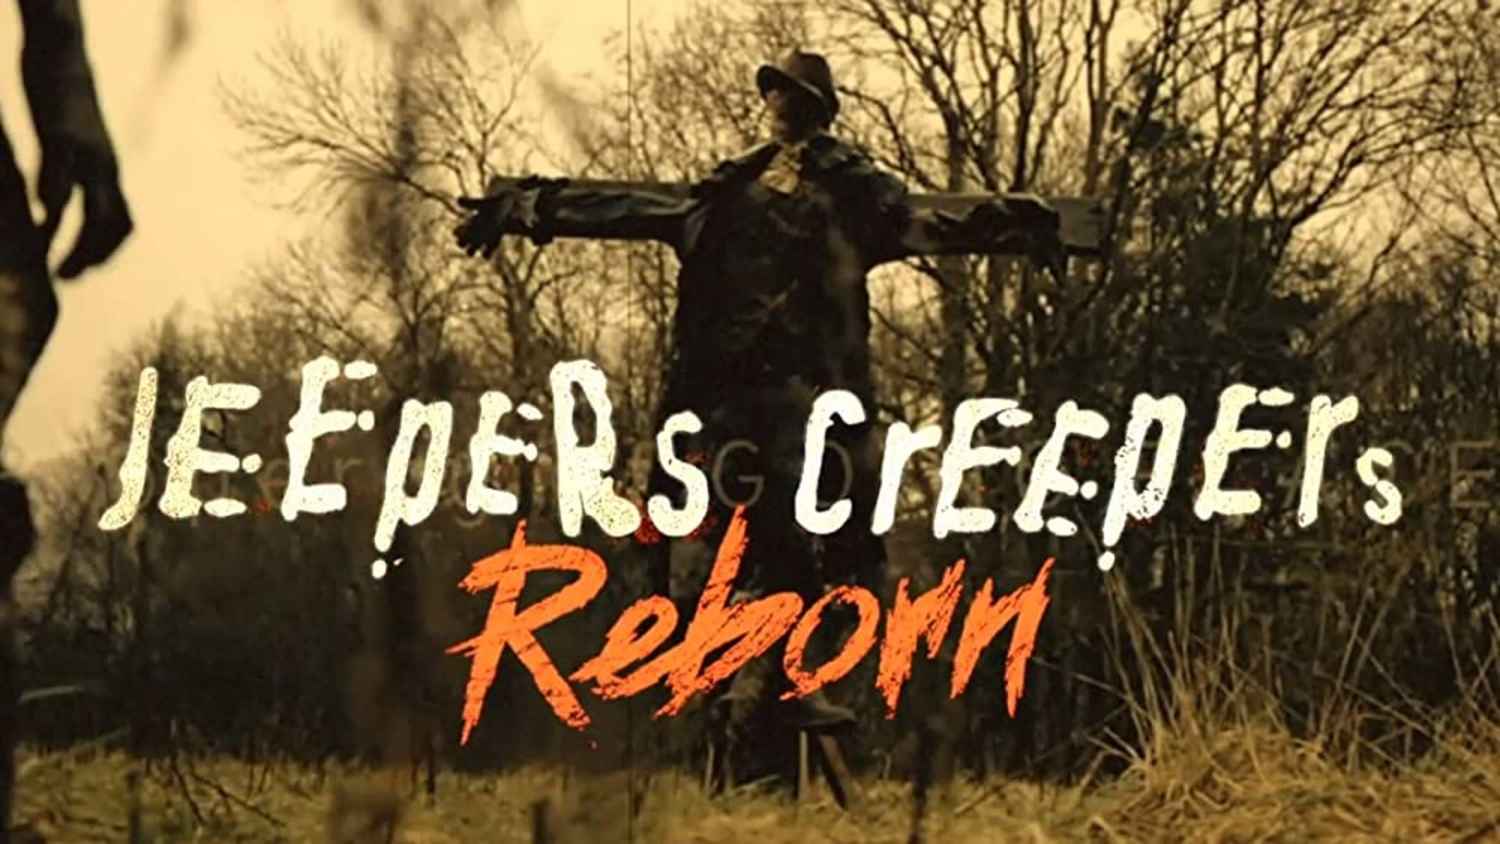 jeepers creepers free online movie